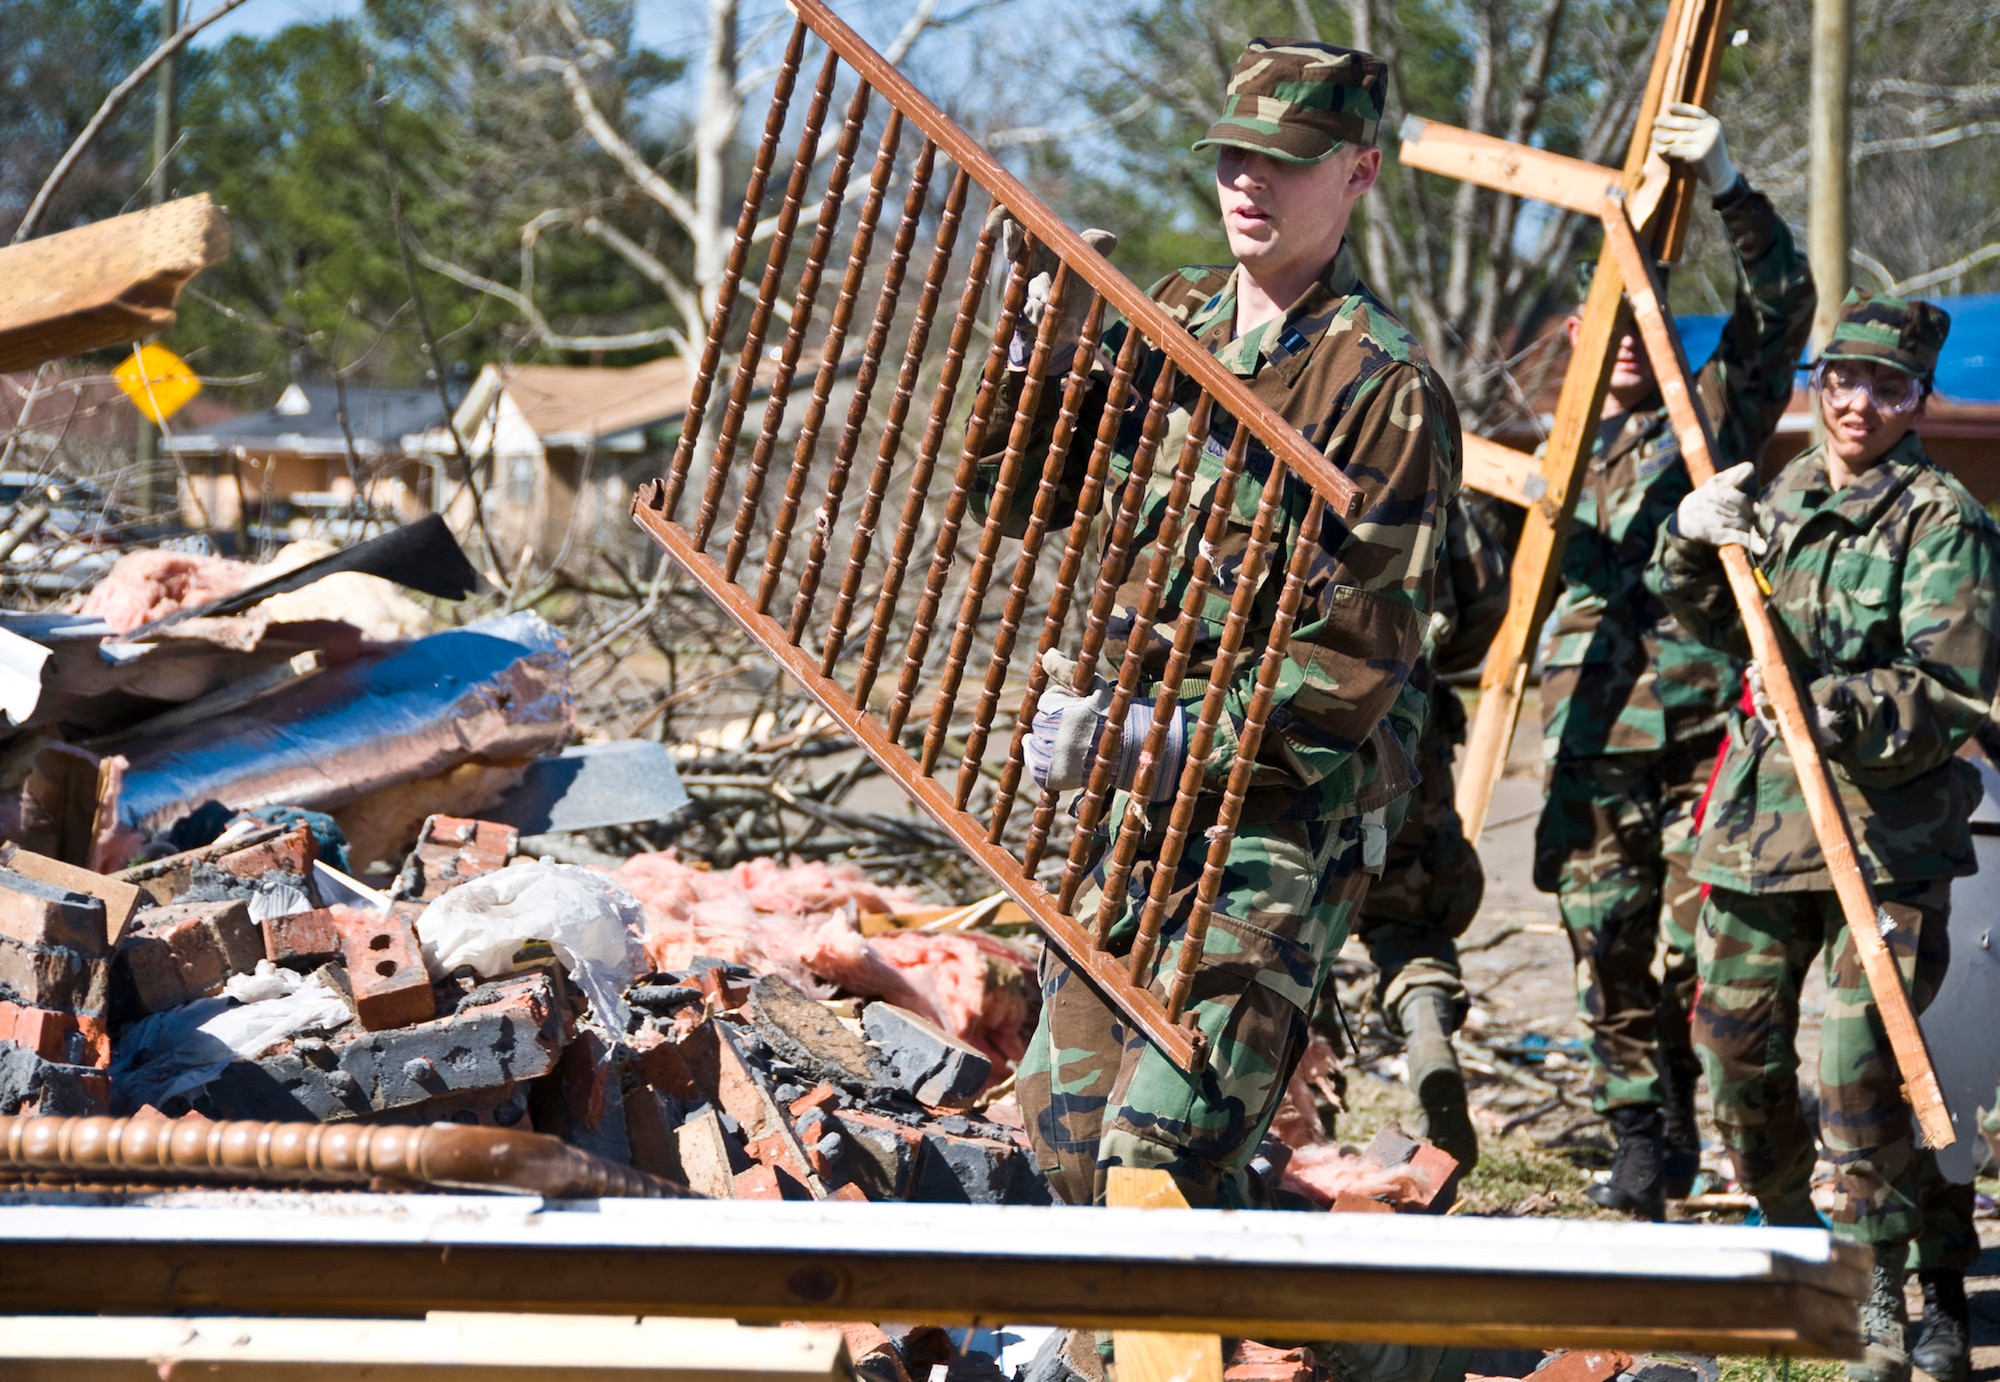 Officer Trainee Michael Hart carries whats left of a crib during a cleanup Feb. 19 after a Feb. 17 tornado ravaged Prattville, Ala. More than 65 Officer Training School basic officer trainees and 20 other Airmen assigned to Maxwell Air Force Base, Ala., volunteered to help organize and clear debris from the city located 15 miles northwest of the base. Base officials held an emergency town hall meeting Feb. 19 for victims of the disaster. Some of the representatives that attended the meeting included finance, chaplain, medical, Airman and Family Readiness Center, Air Force Aid Society, Child Development Center, Traffic Management Office and legal. The base's privatized housing developer, Pinnacle-Hunt also offered on-base housing options for military families needing immediate shelter. (U.S. Air Force photo/Master Sgt. Scott Moorman) 
